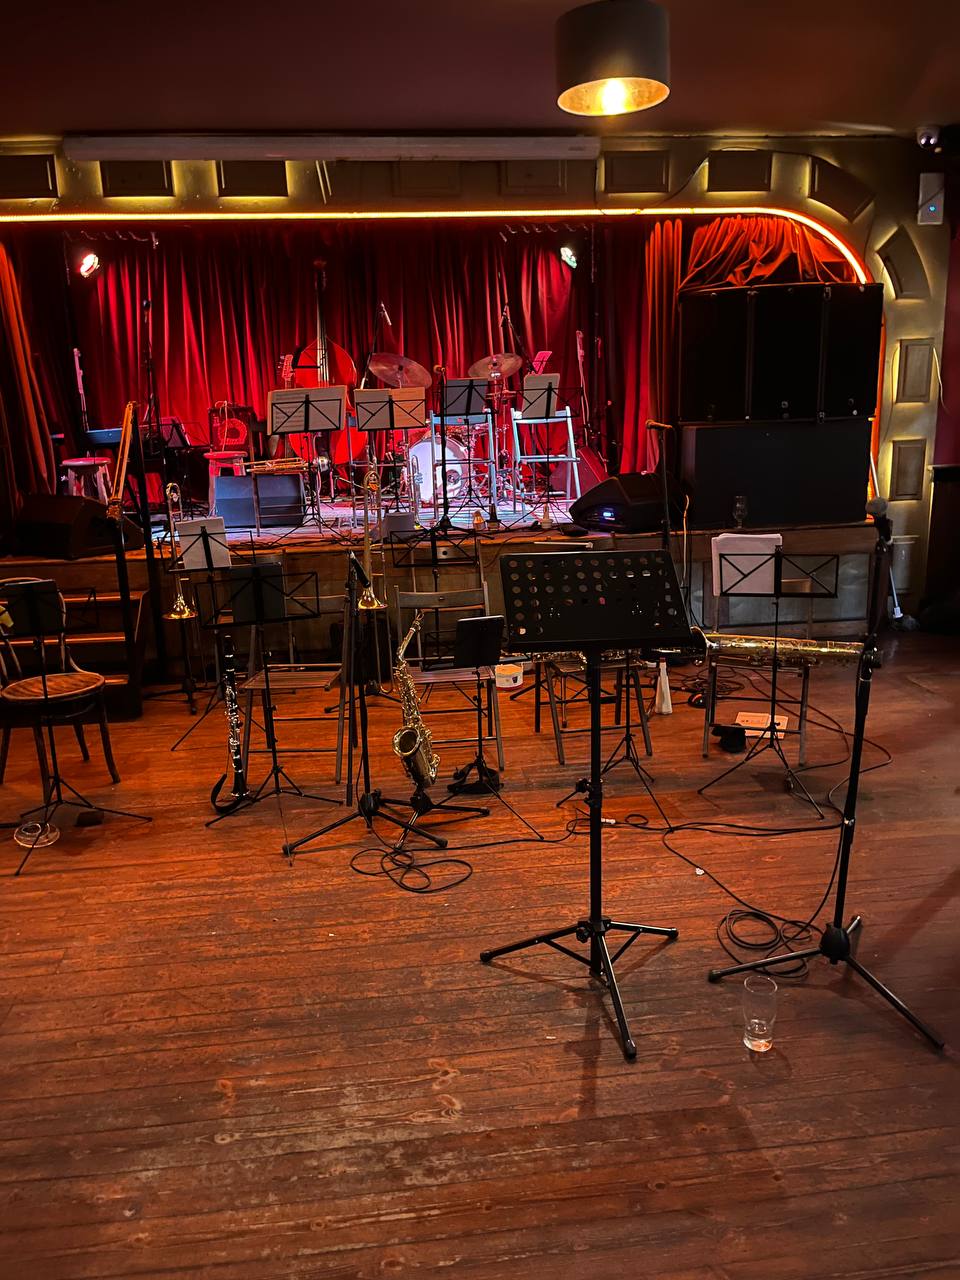 Stage in Crane Lane, set up for a big band, with rows of chairs for trombones and saxes below the stage